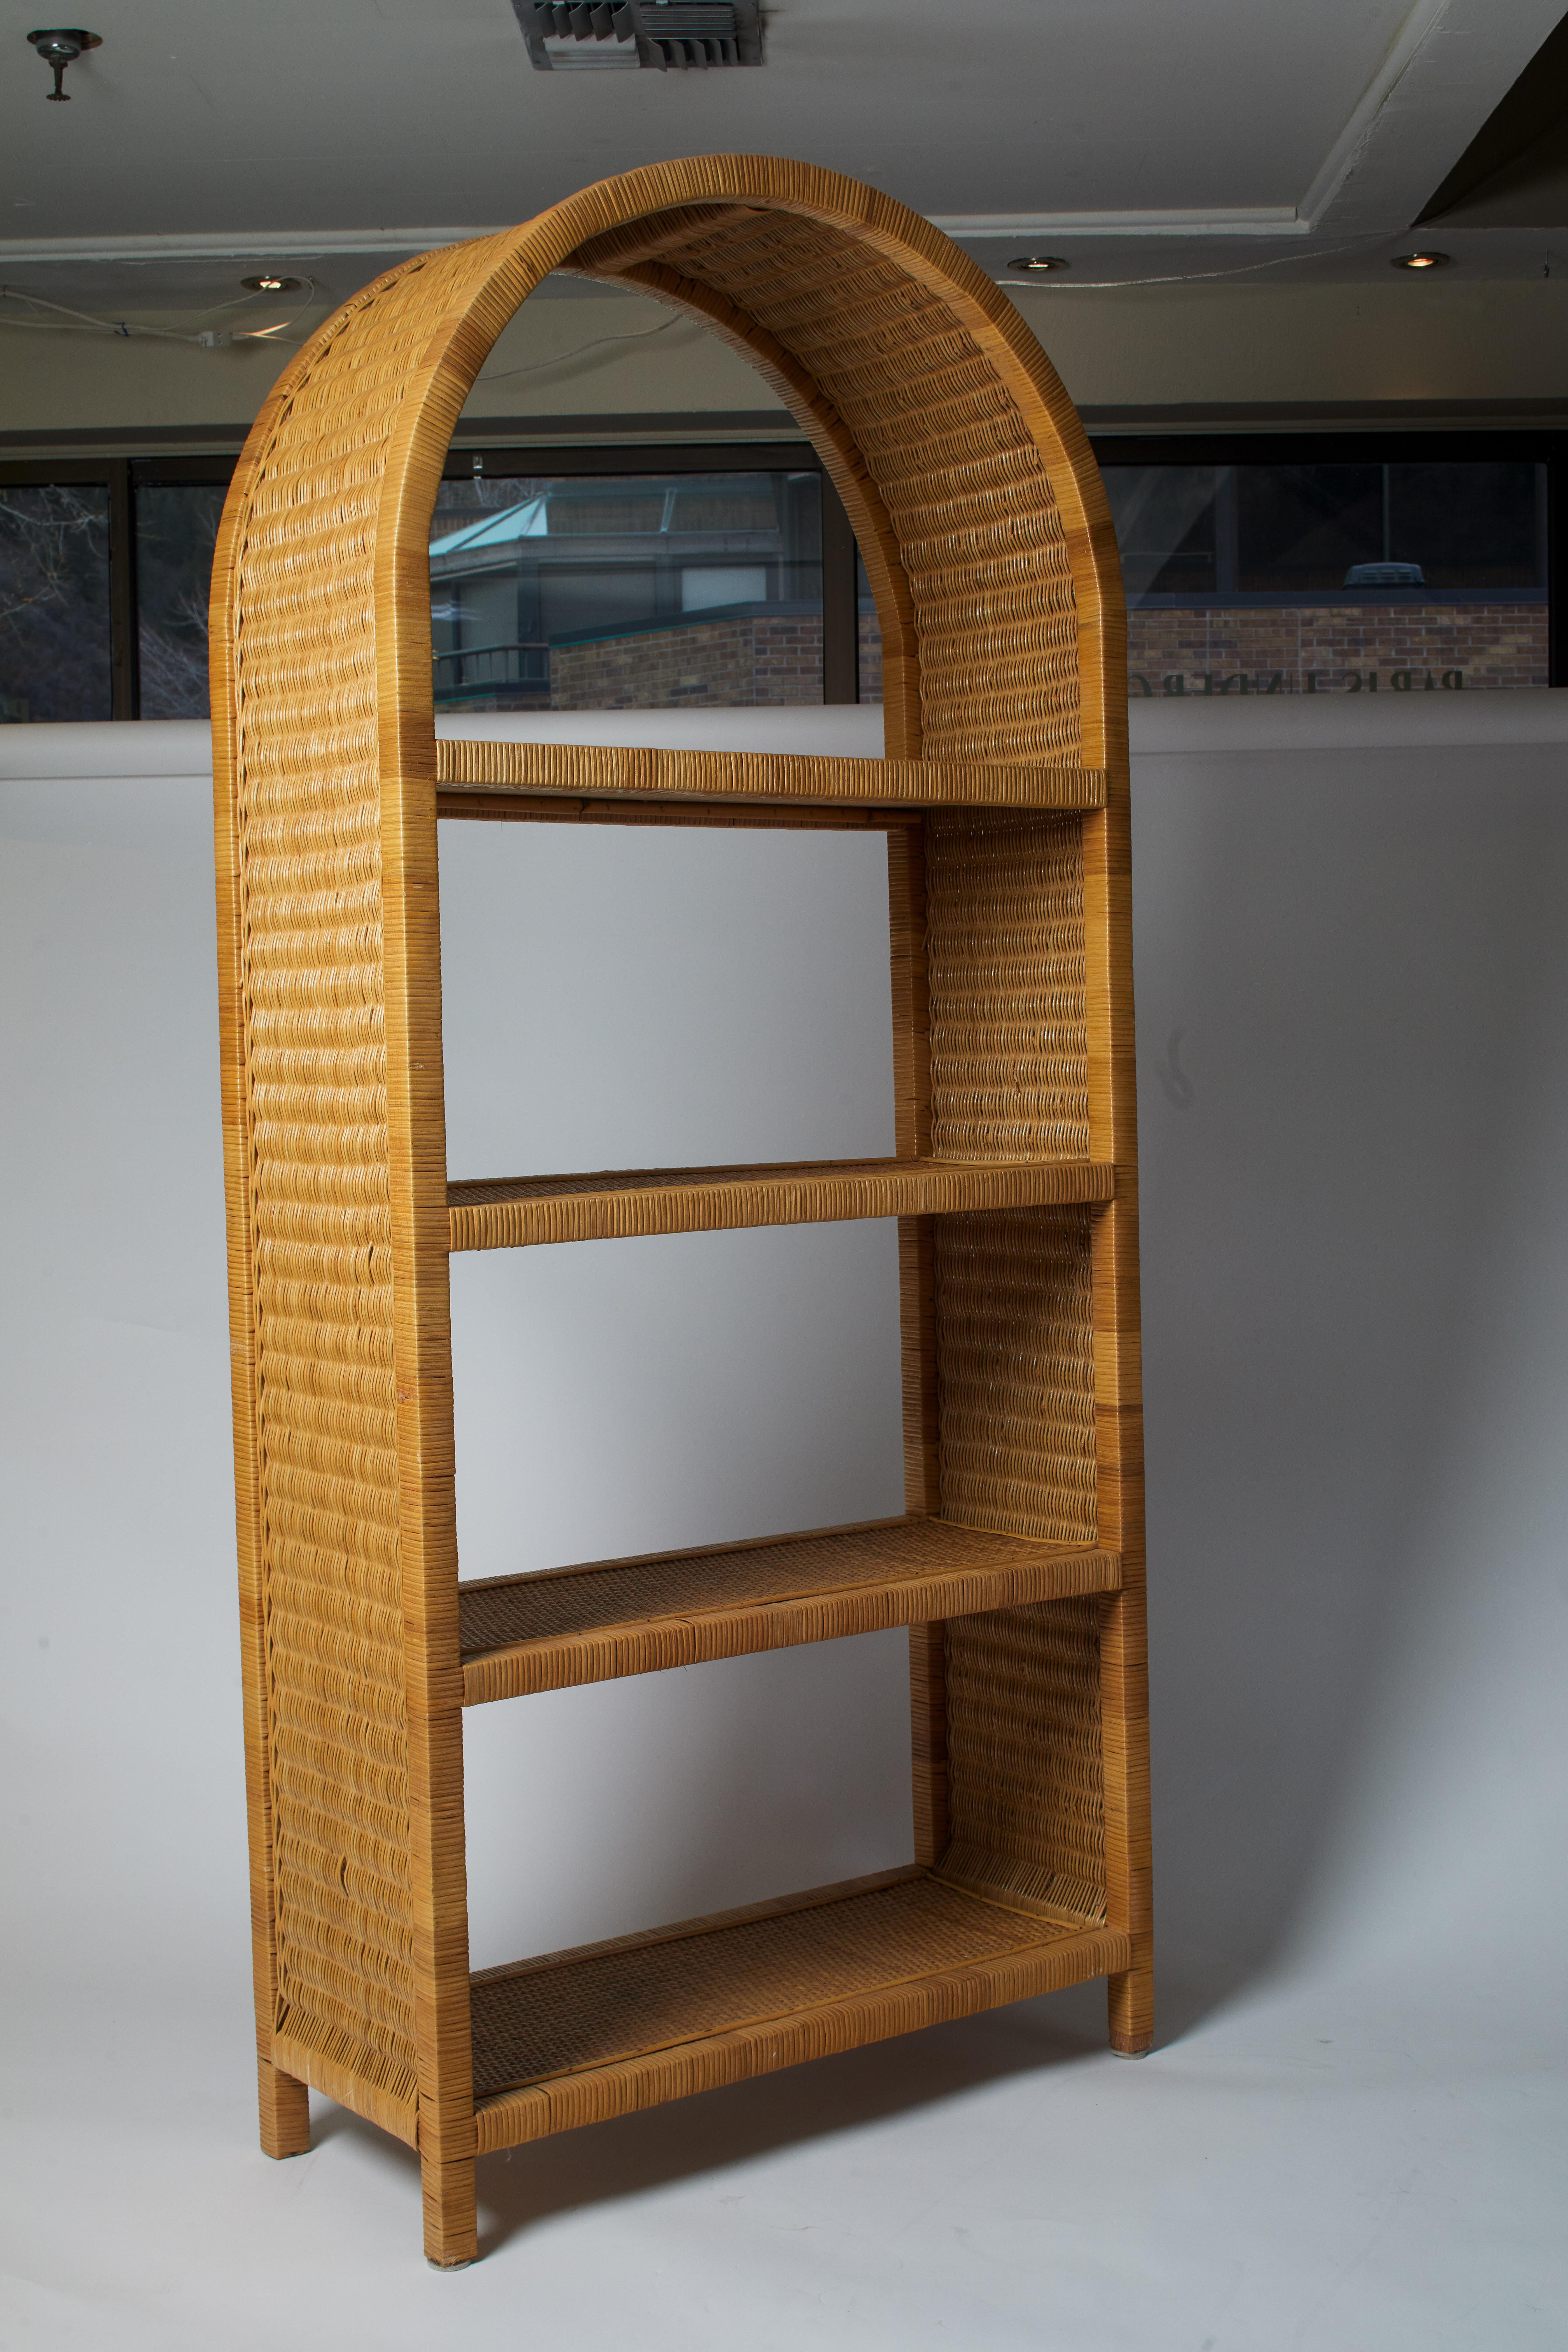 1970s Italian bamboo and wicker curved top etagere with four shelves. The Top shelf is perfect for showcasing a sculpture or objet while the bottom shelves fit vases, plates and more.